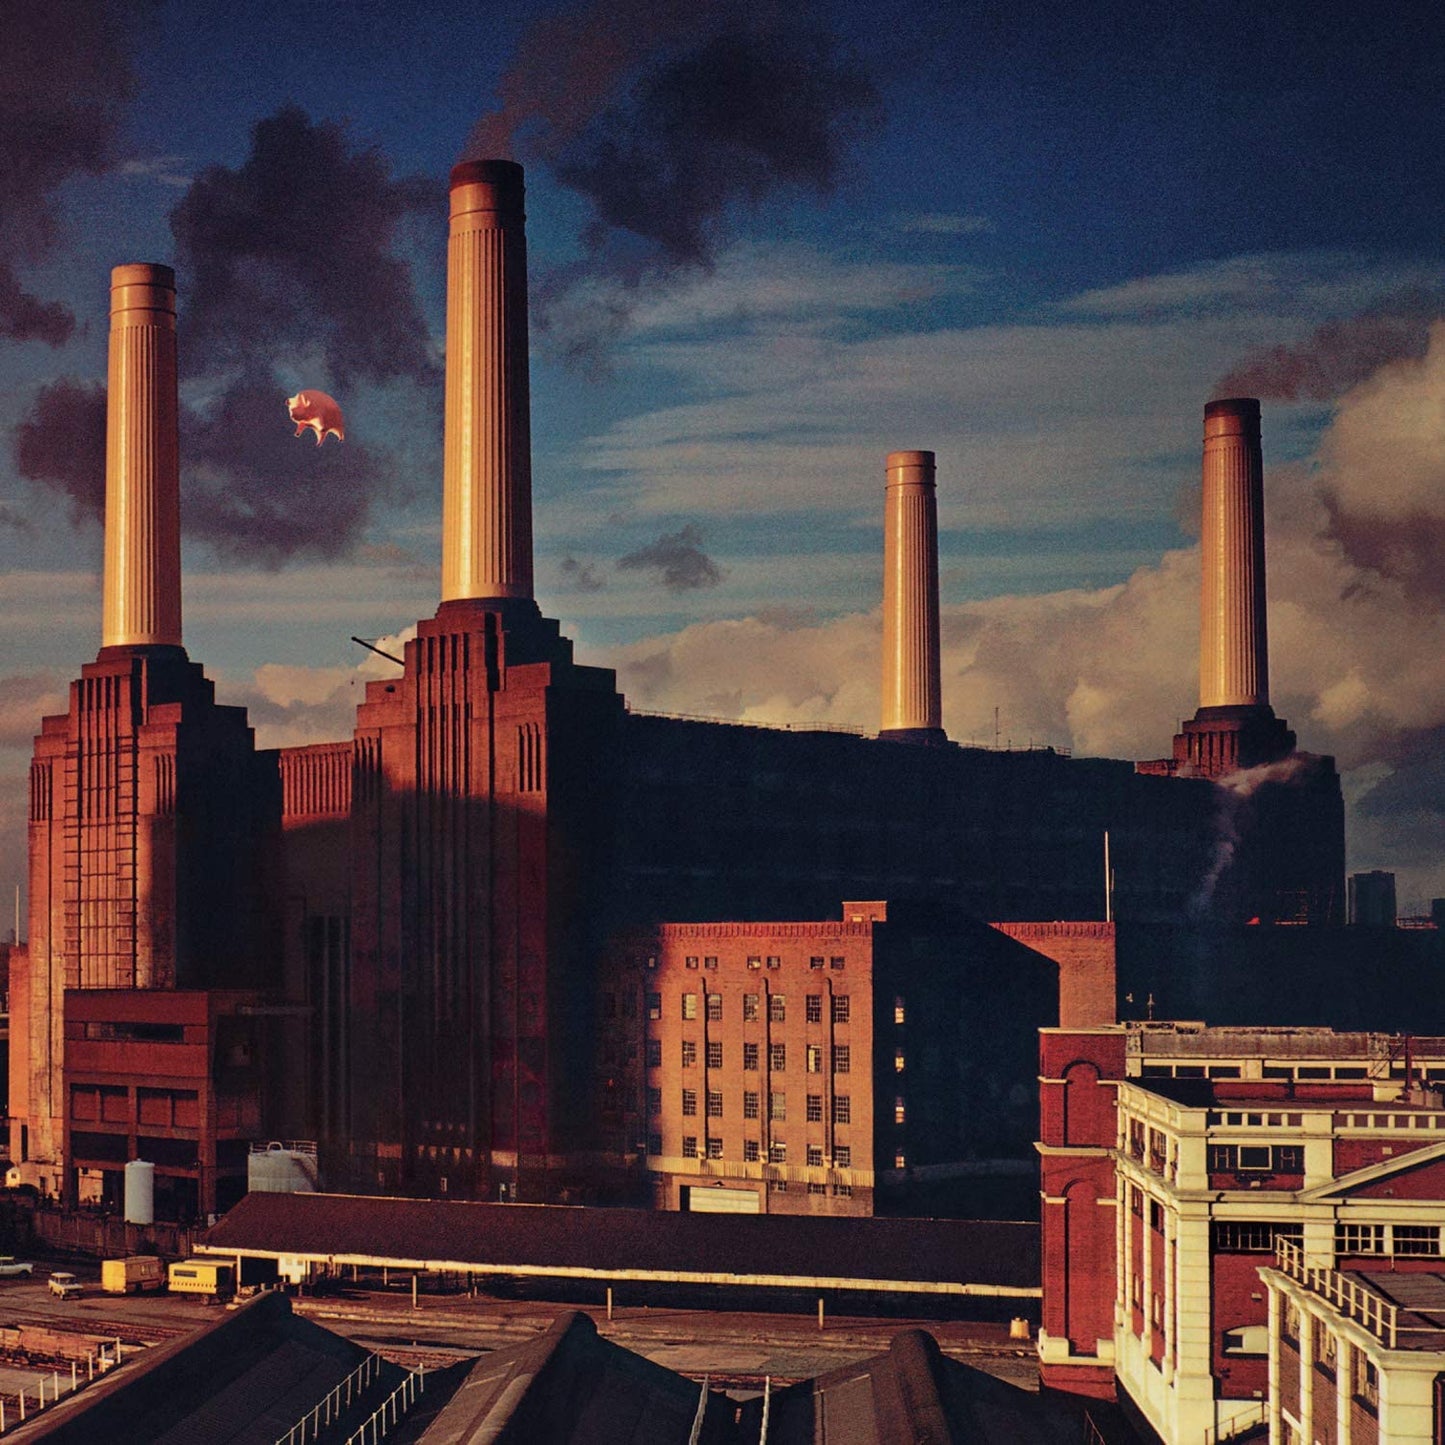 The 10th studio album on Vinyl by Pink Floyd. The album continues the longform compositions that made up their previous works, including 'Wish You Were Here' (1975).